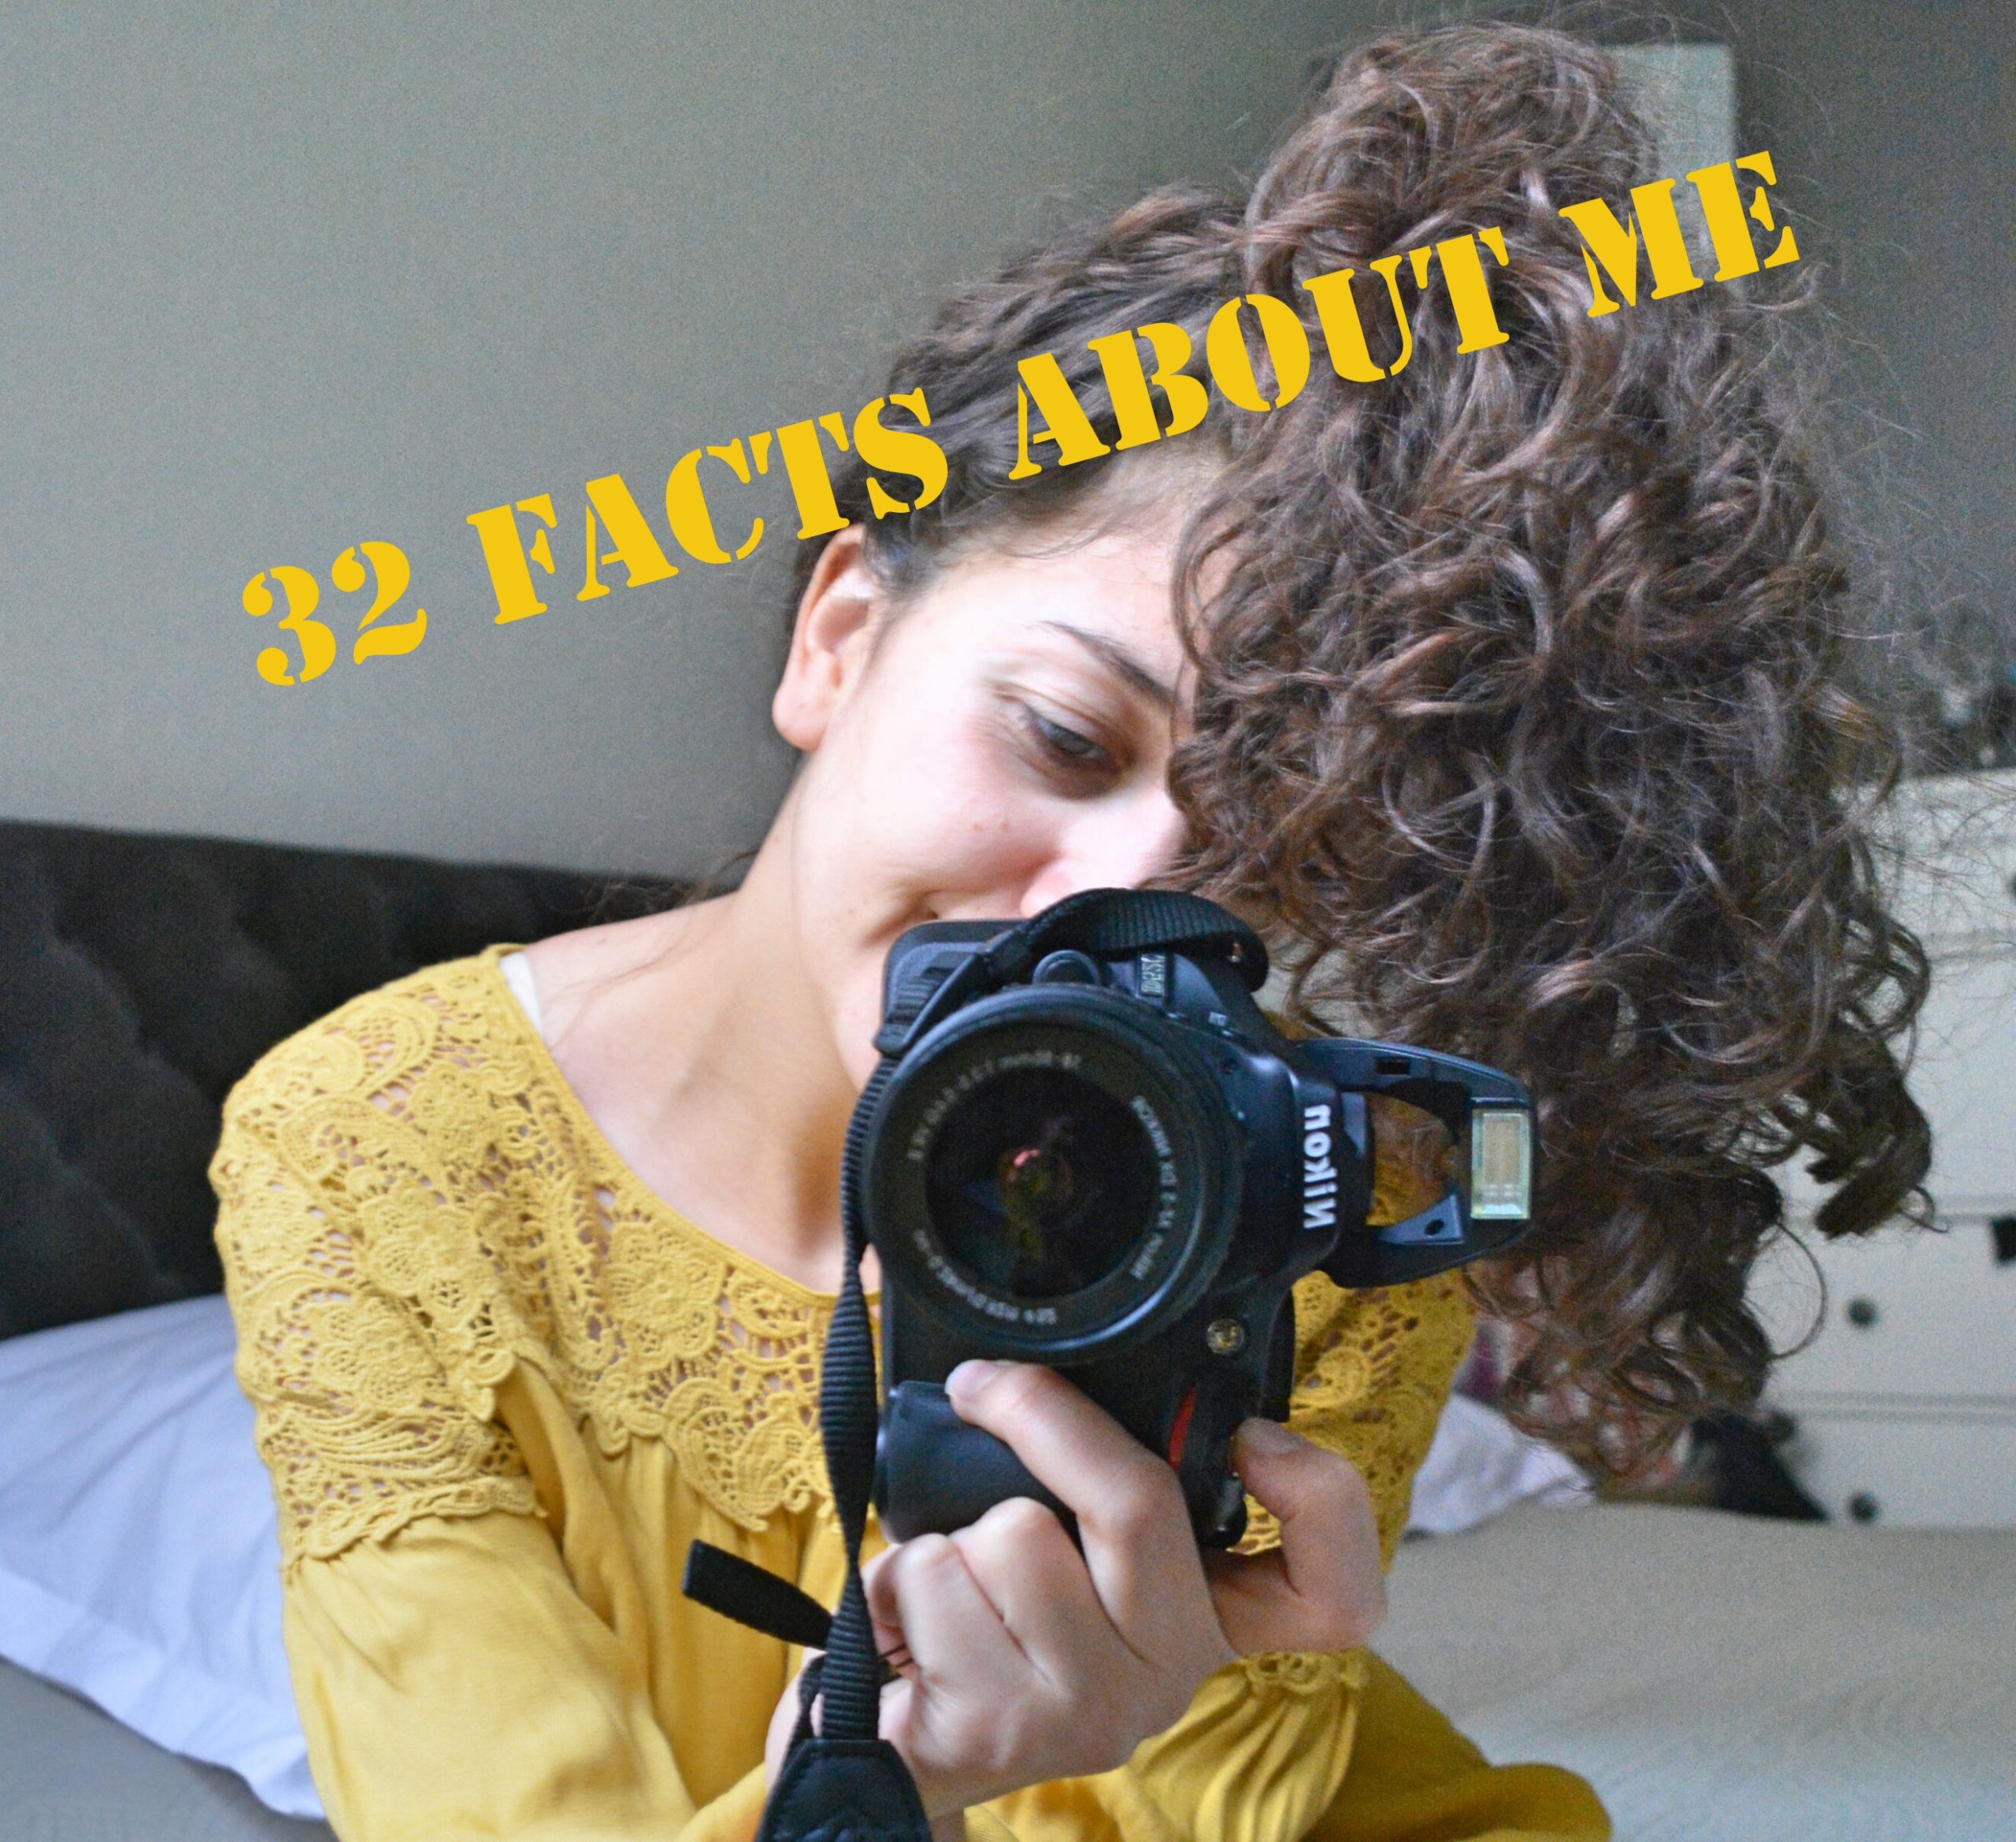 32 facts about me – blablabla